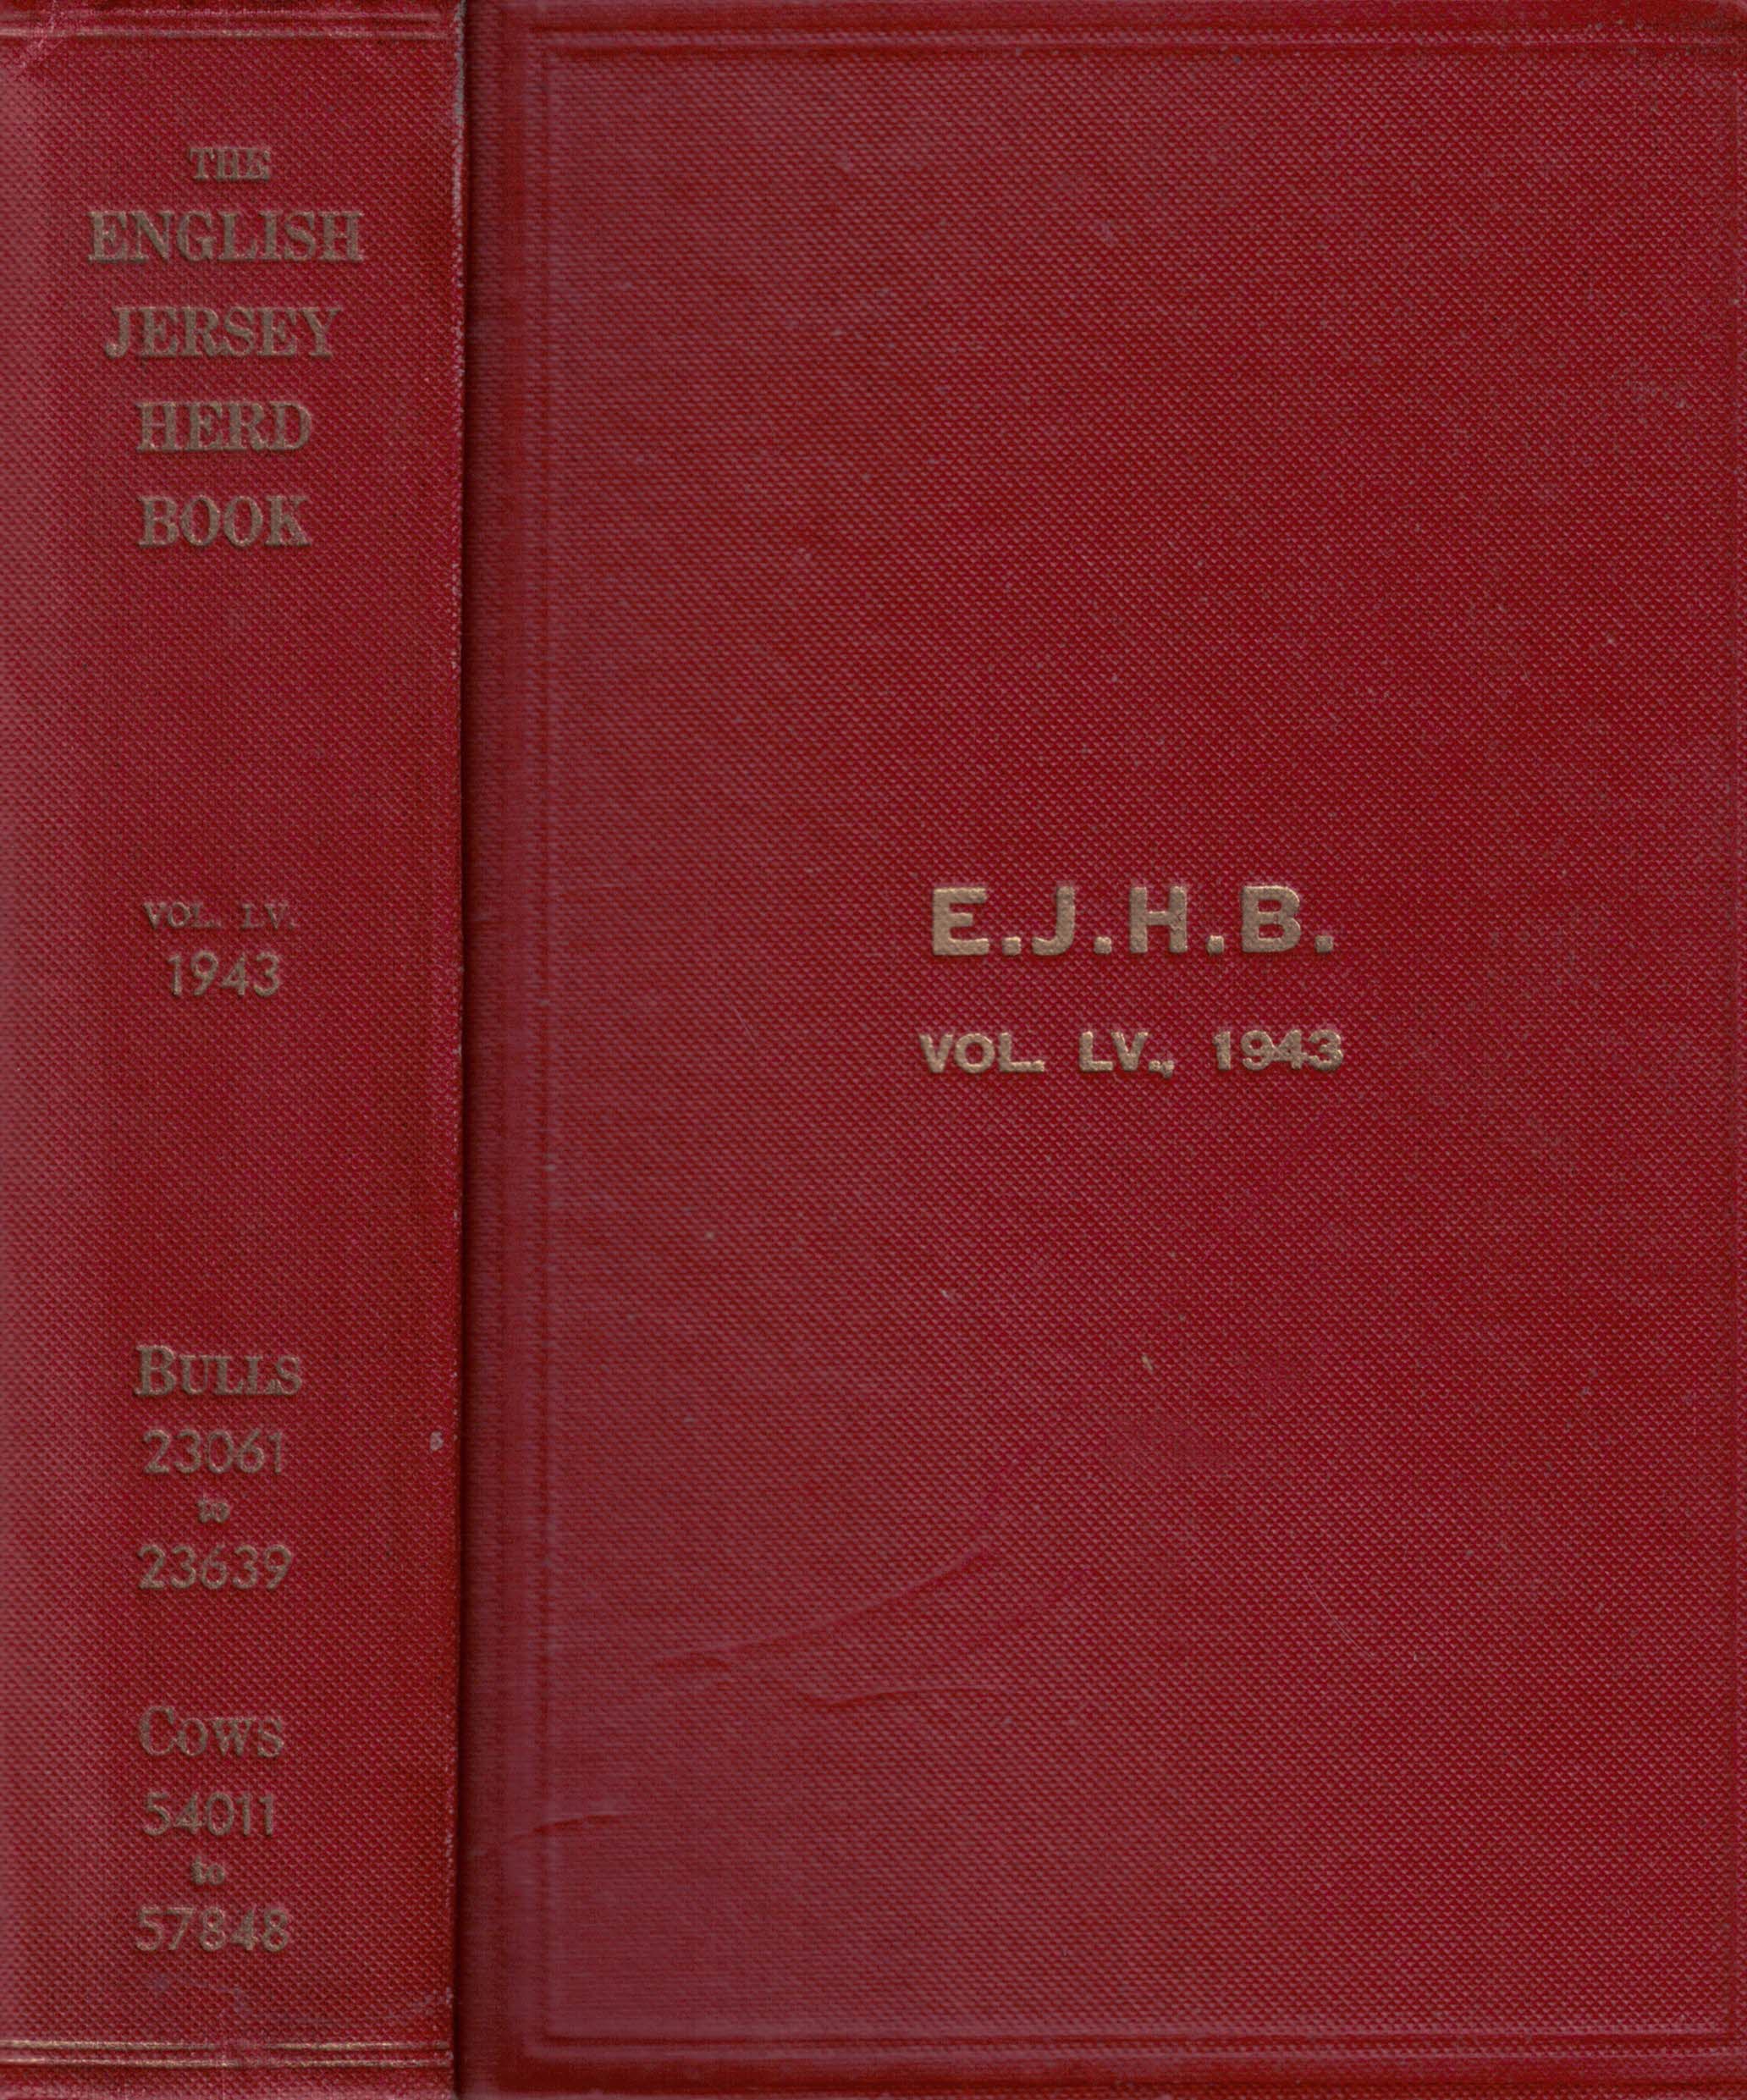 The English Jersey Cattle Society's Herd Book. Volume LV. 1943.